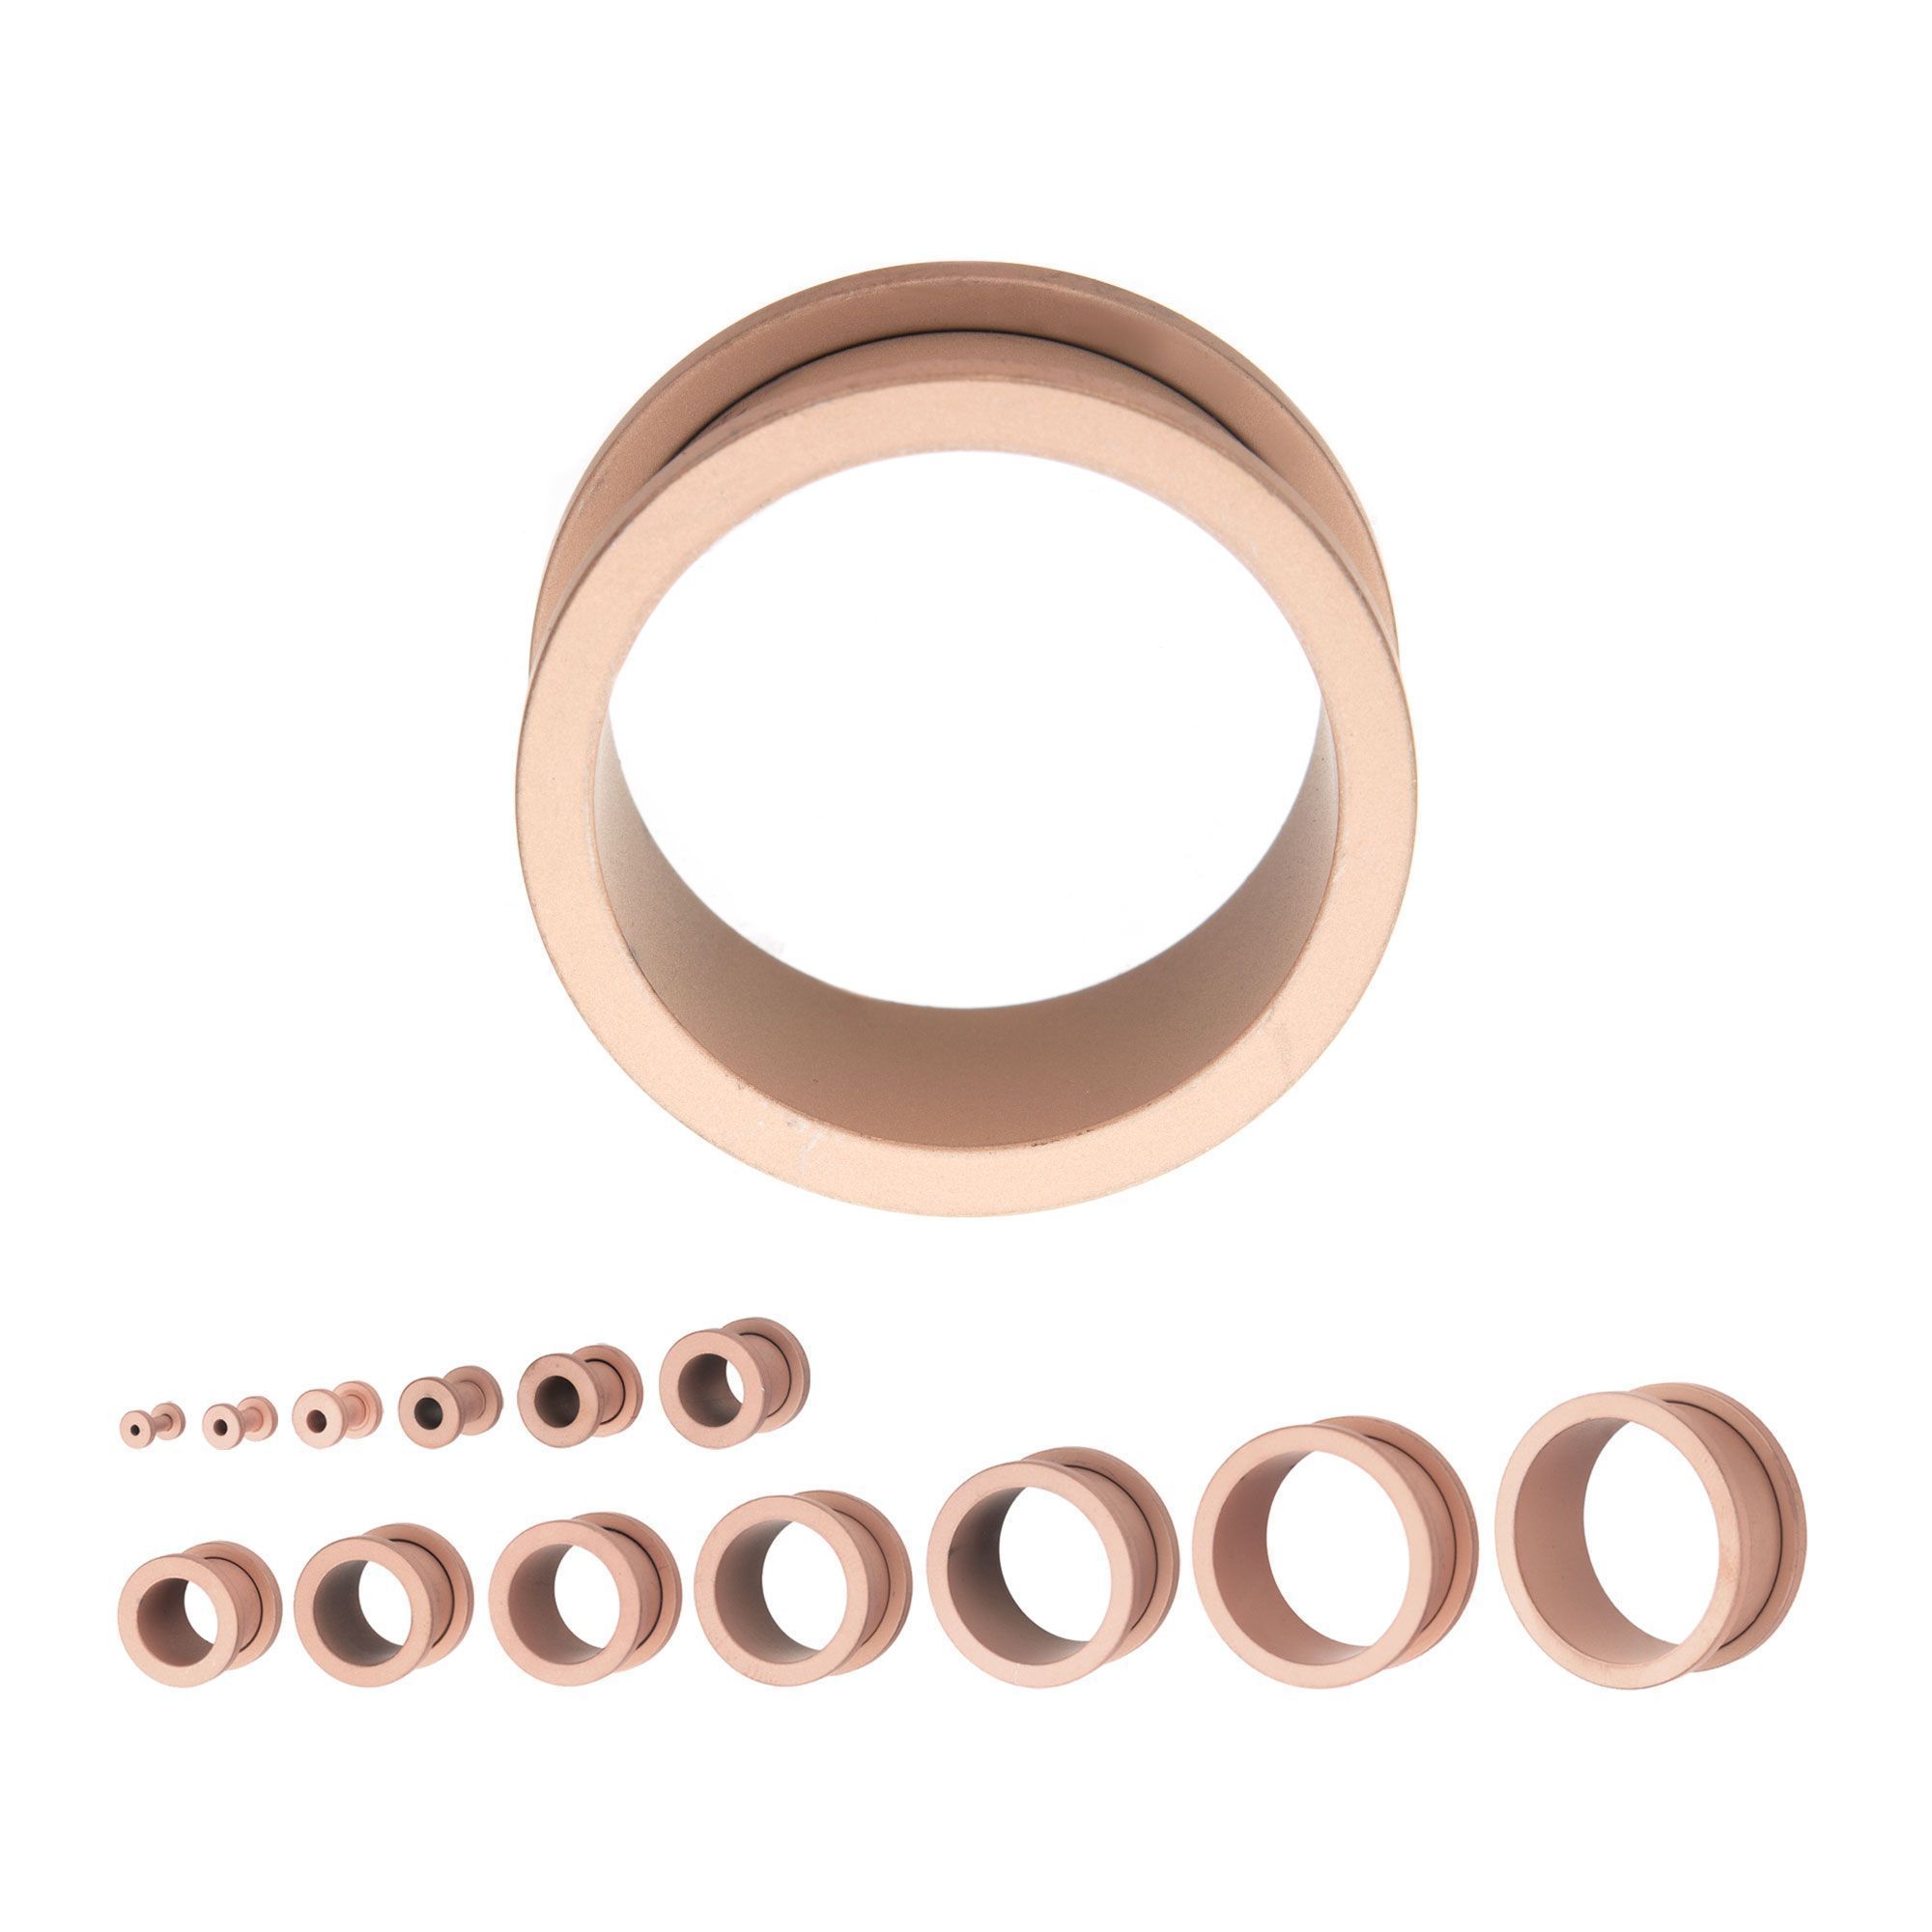 Tunnels - Double Flare Smooth Matte Finish Rose Gold Plated Screw Fit Tunnel Plugs - 1 Pair  sbvptmrgs -Rebel Bod-RebelBod